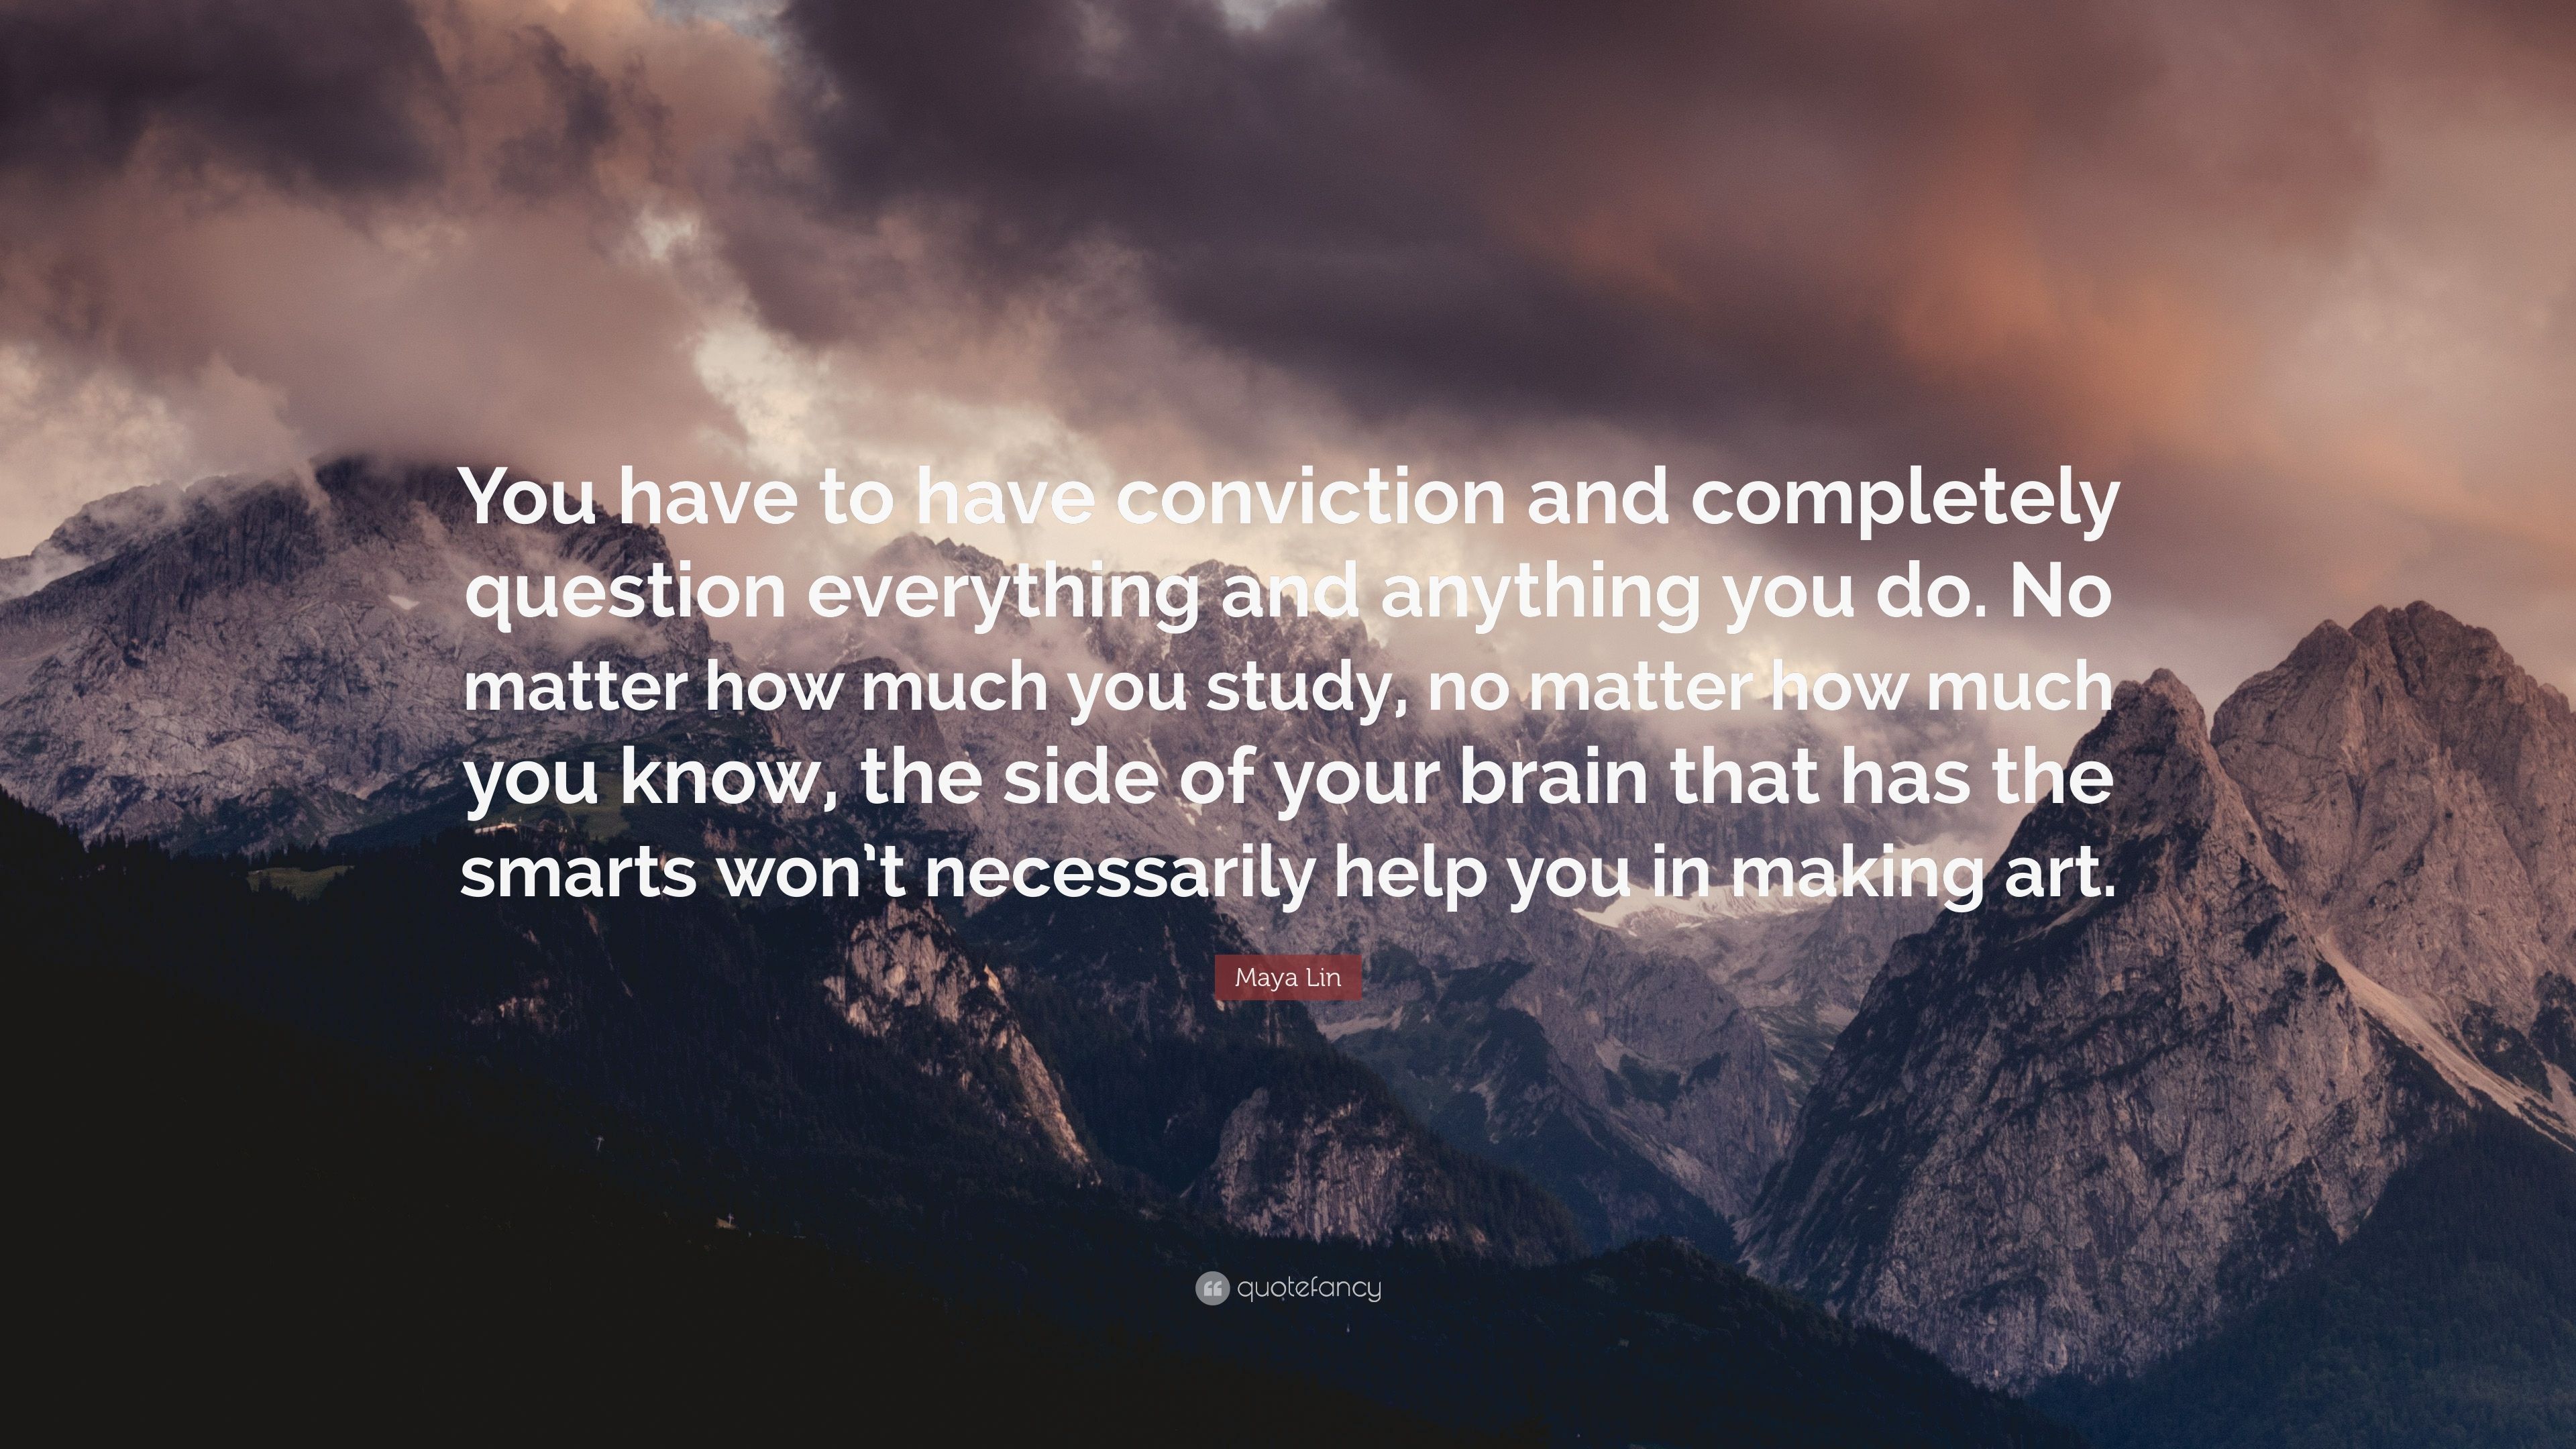 Maya Lin Quote: “You have to have conviction and completely question everything and anything you do. No matter how much you study, no mat.” (7 wallpaper)